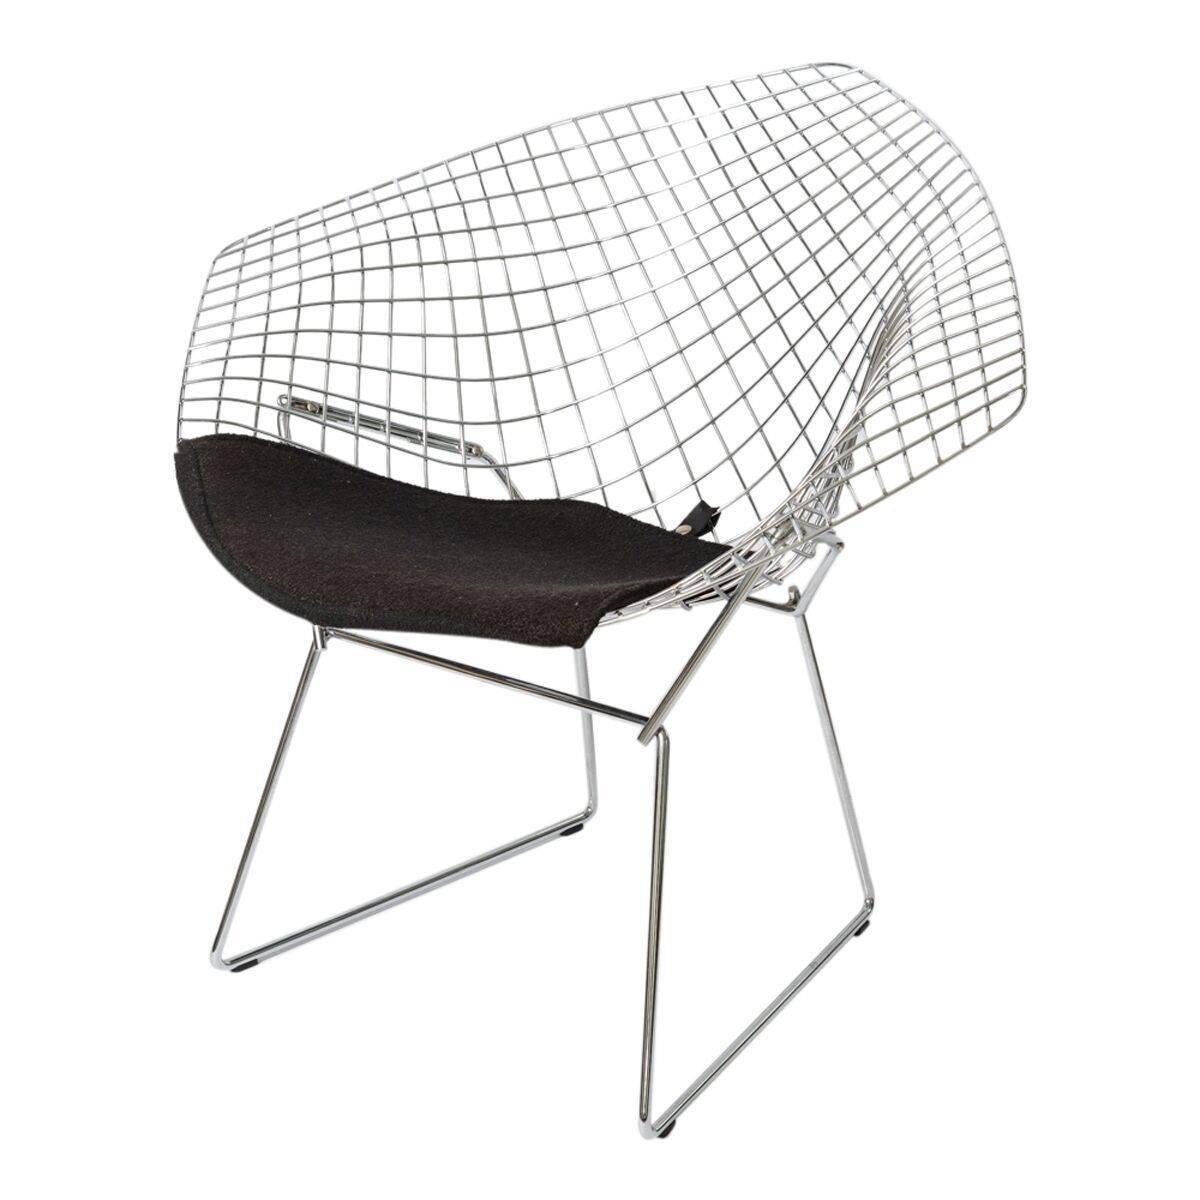 "Diamond" Chair in Polished Chrome with Black Upholstery